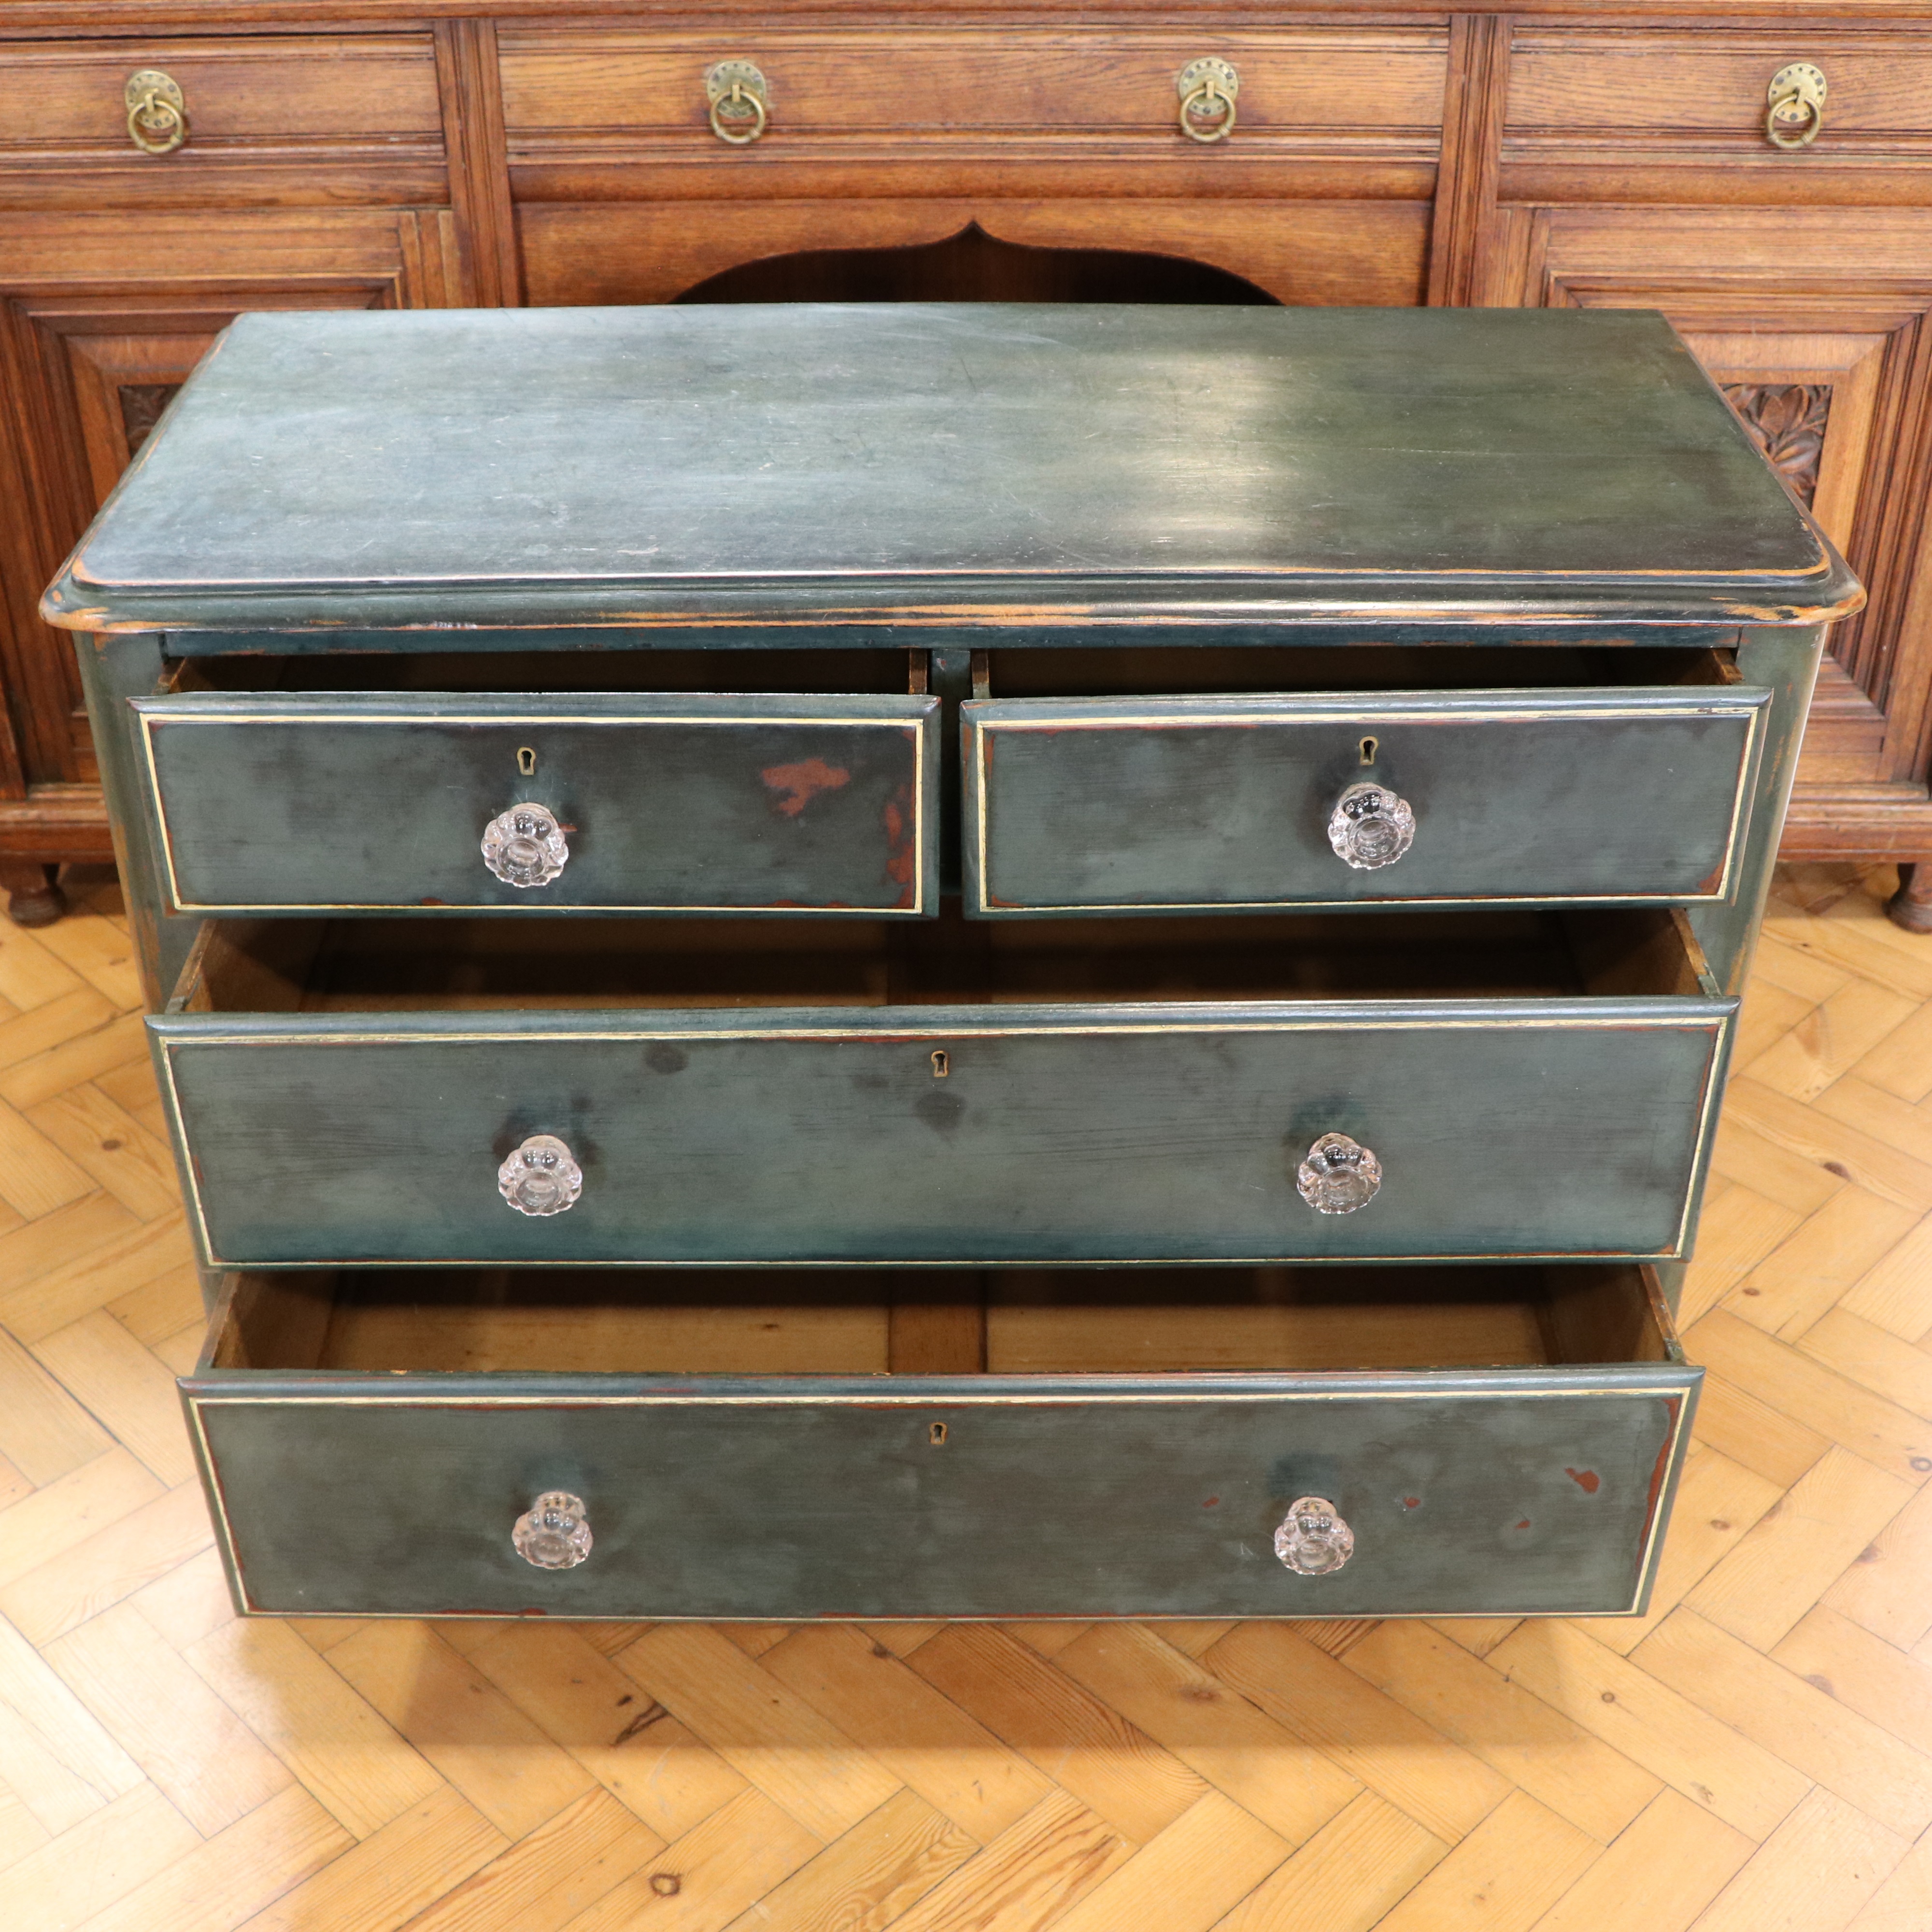 A Victorian painted-pine chest of drawers, having pressed glass lobed knob handles, 52 cm x 104 cm x - Image 4 of 4